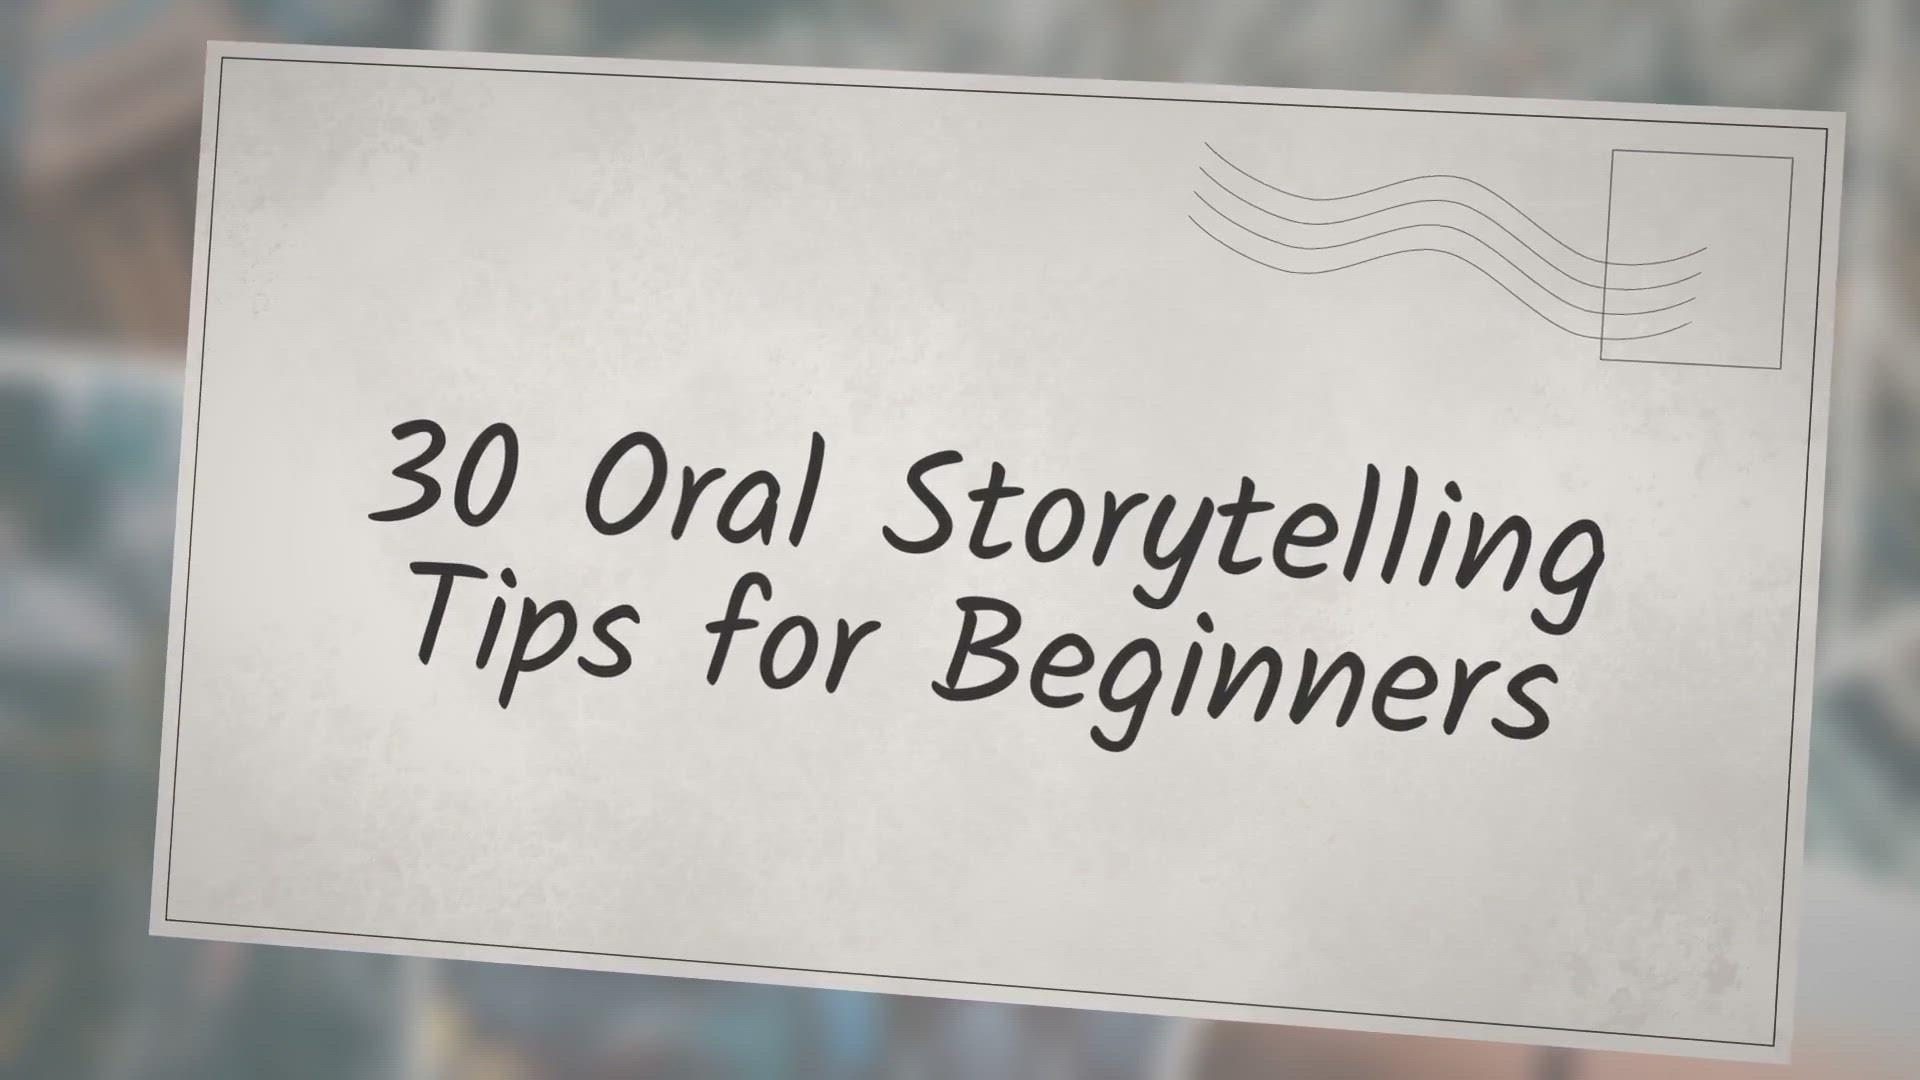 'Video thumbnail for 30 Oral Storytelling Tips for Beginners'